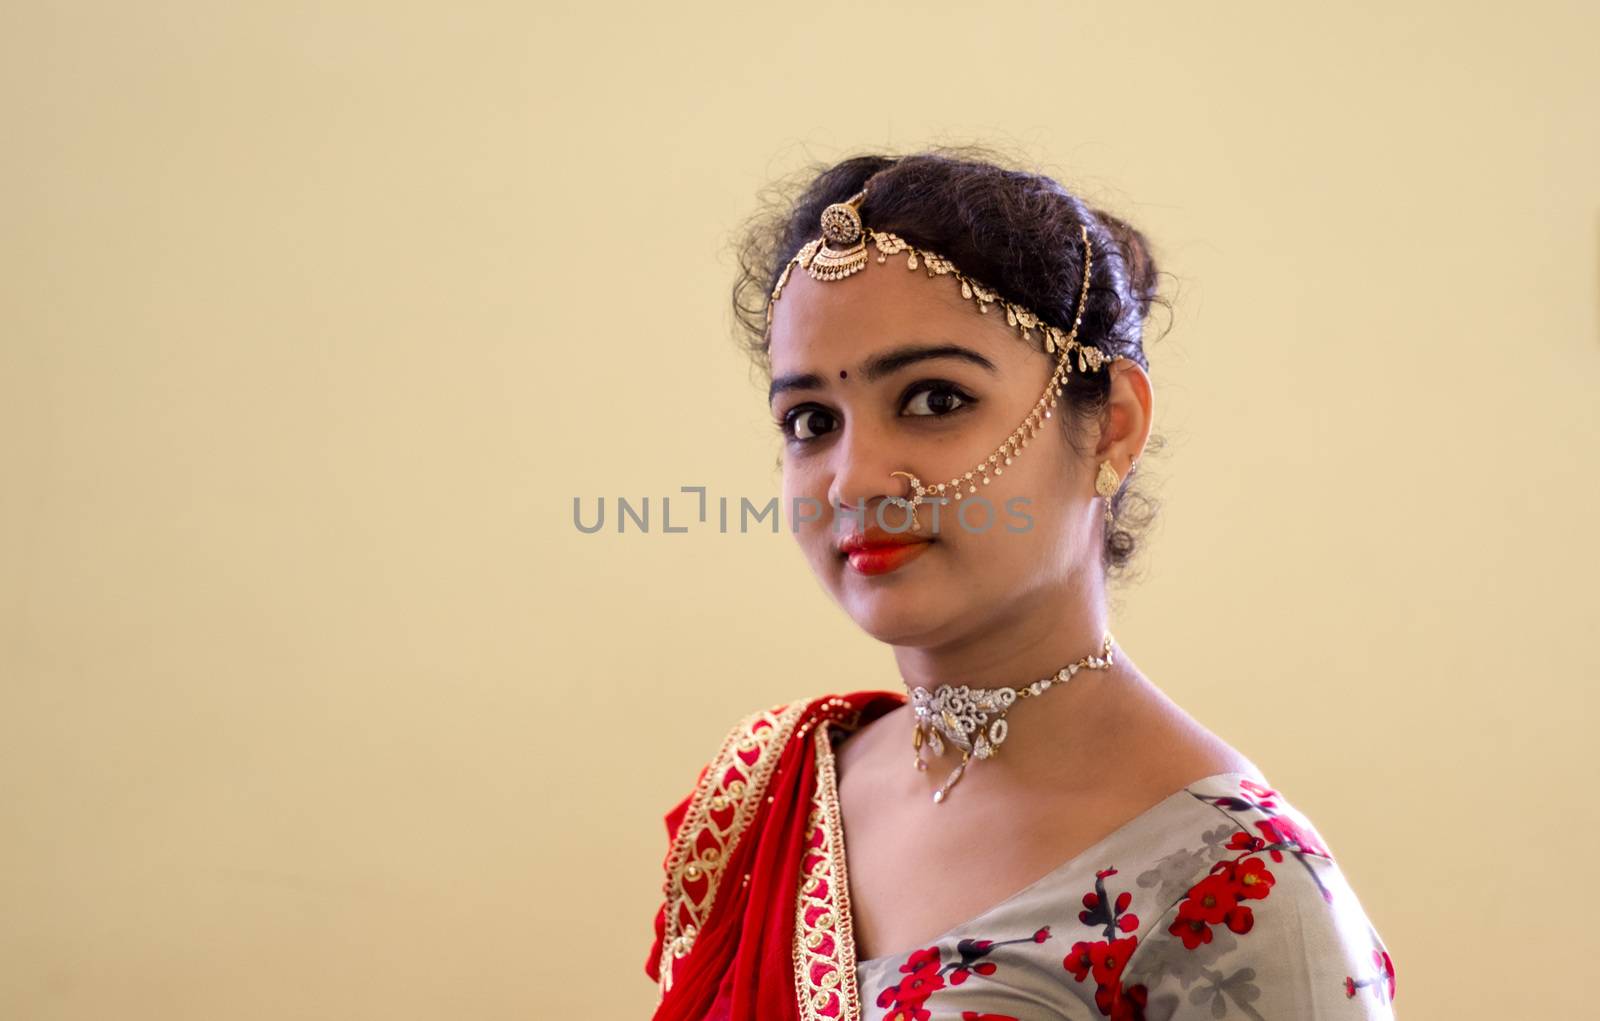 A beautiful young Hindu woman wore gold ornaments and a Colorful floral design choli and red odani according to her traditions and customs.